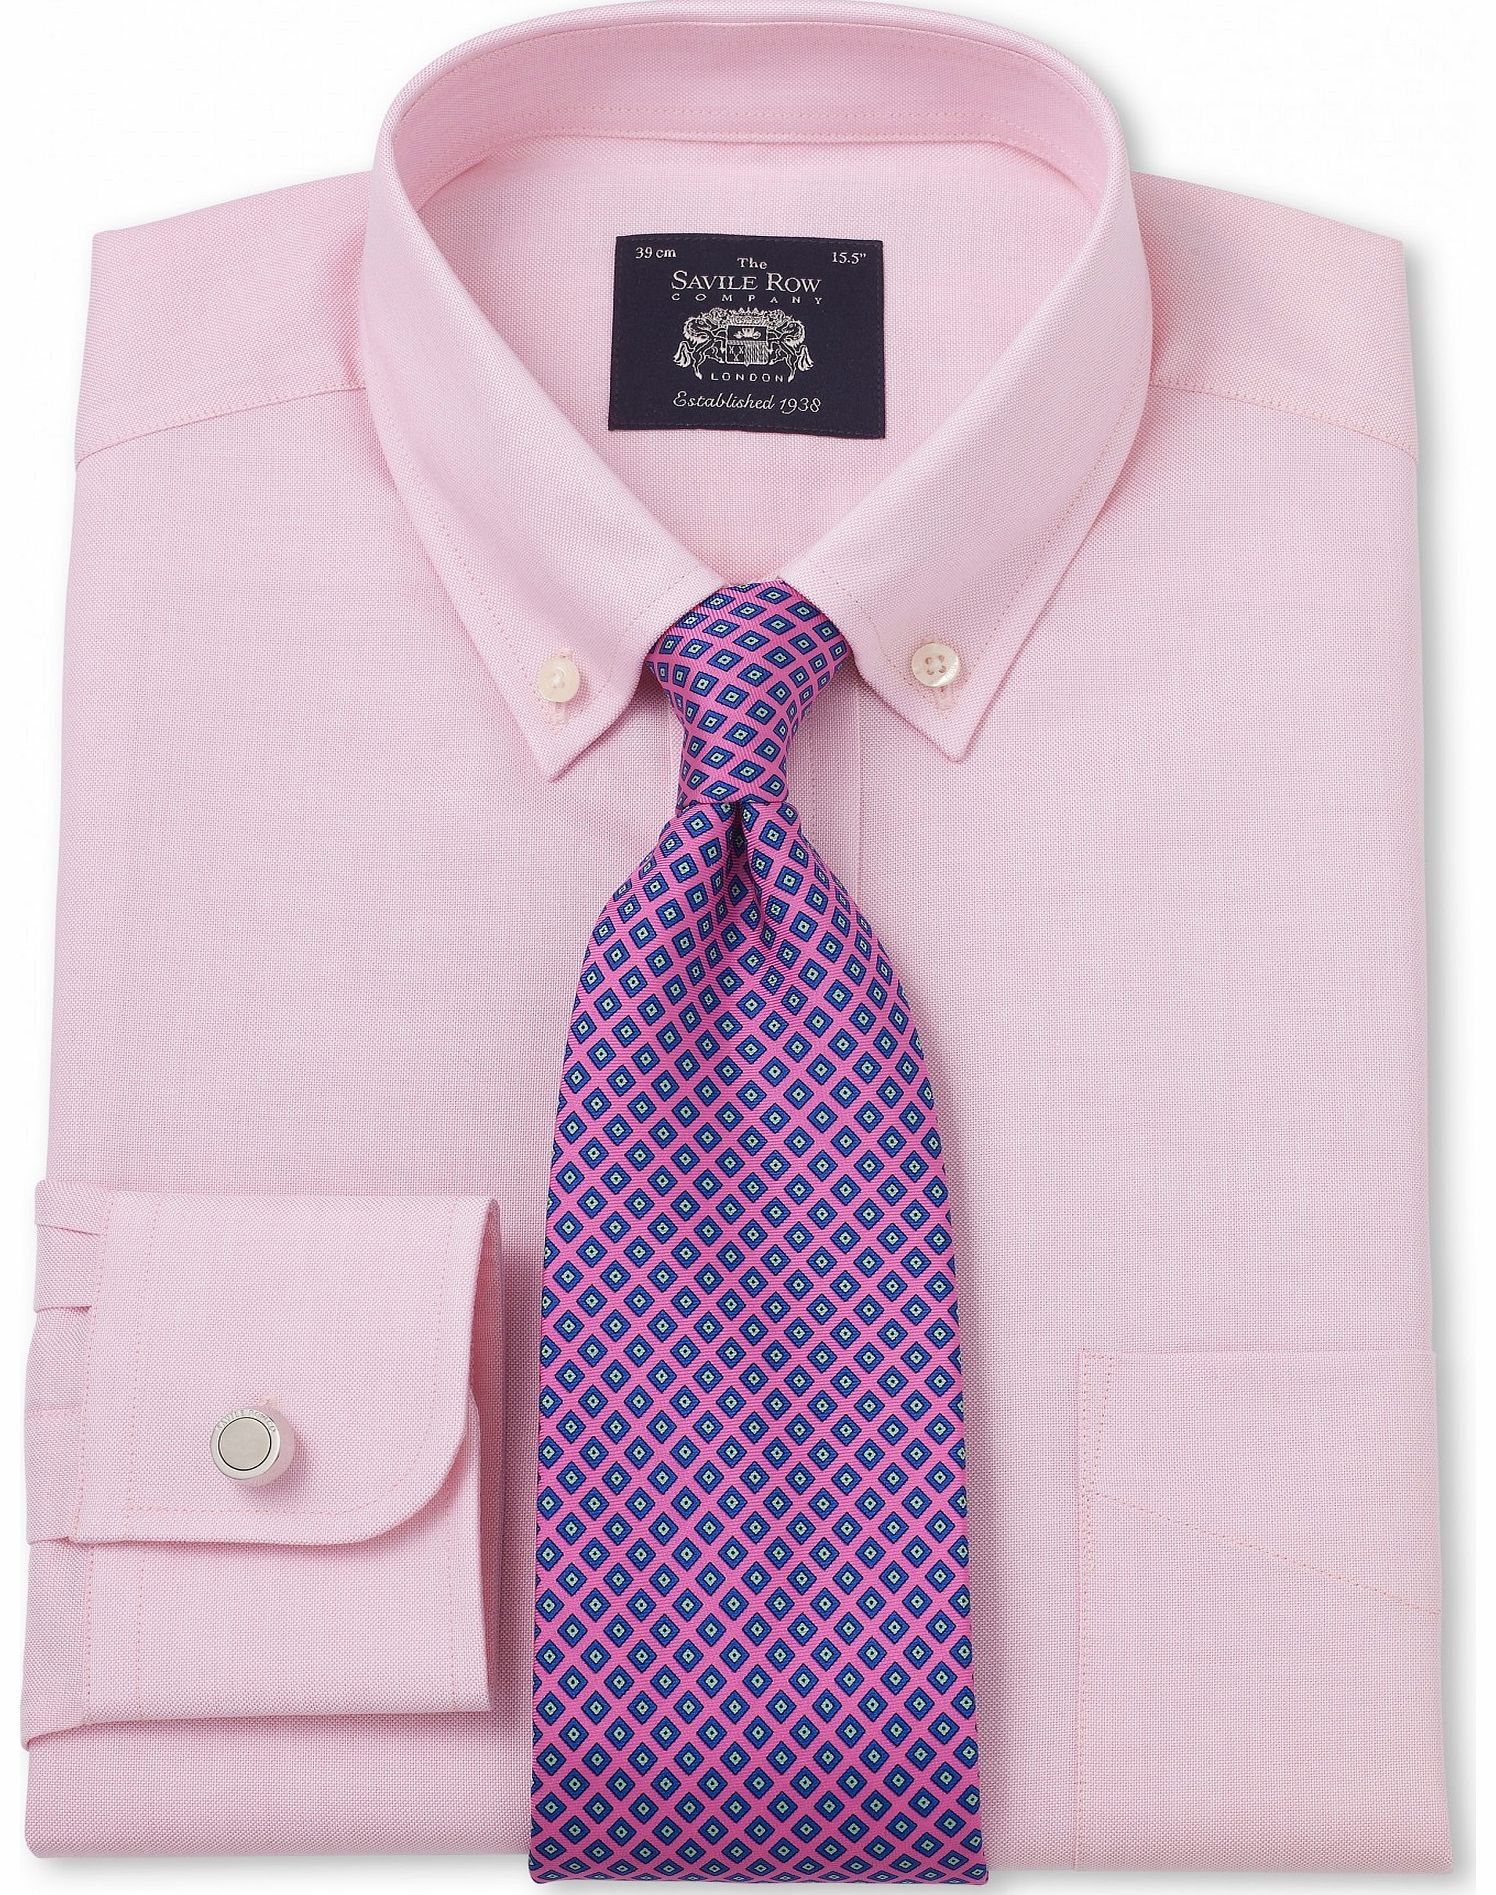 Savile Row Company Pink Pinpoint Classic Fit Shirt 19 1/2``